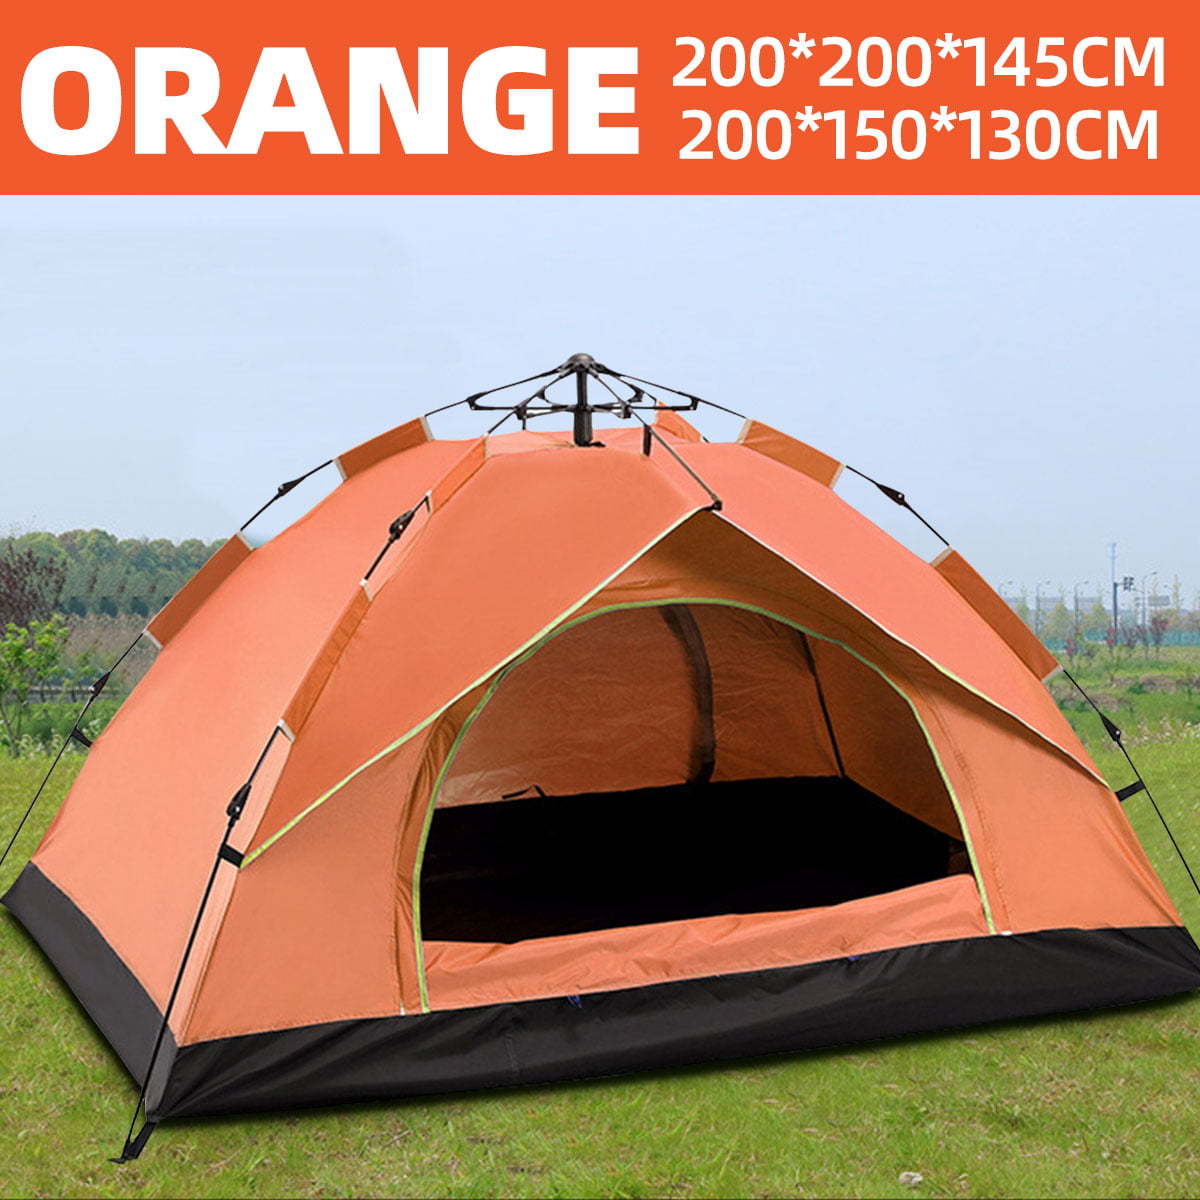 3-4 People Camping Hiking Tent Waterproof Automatic Outdoor Instant PopUp 